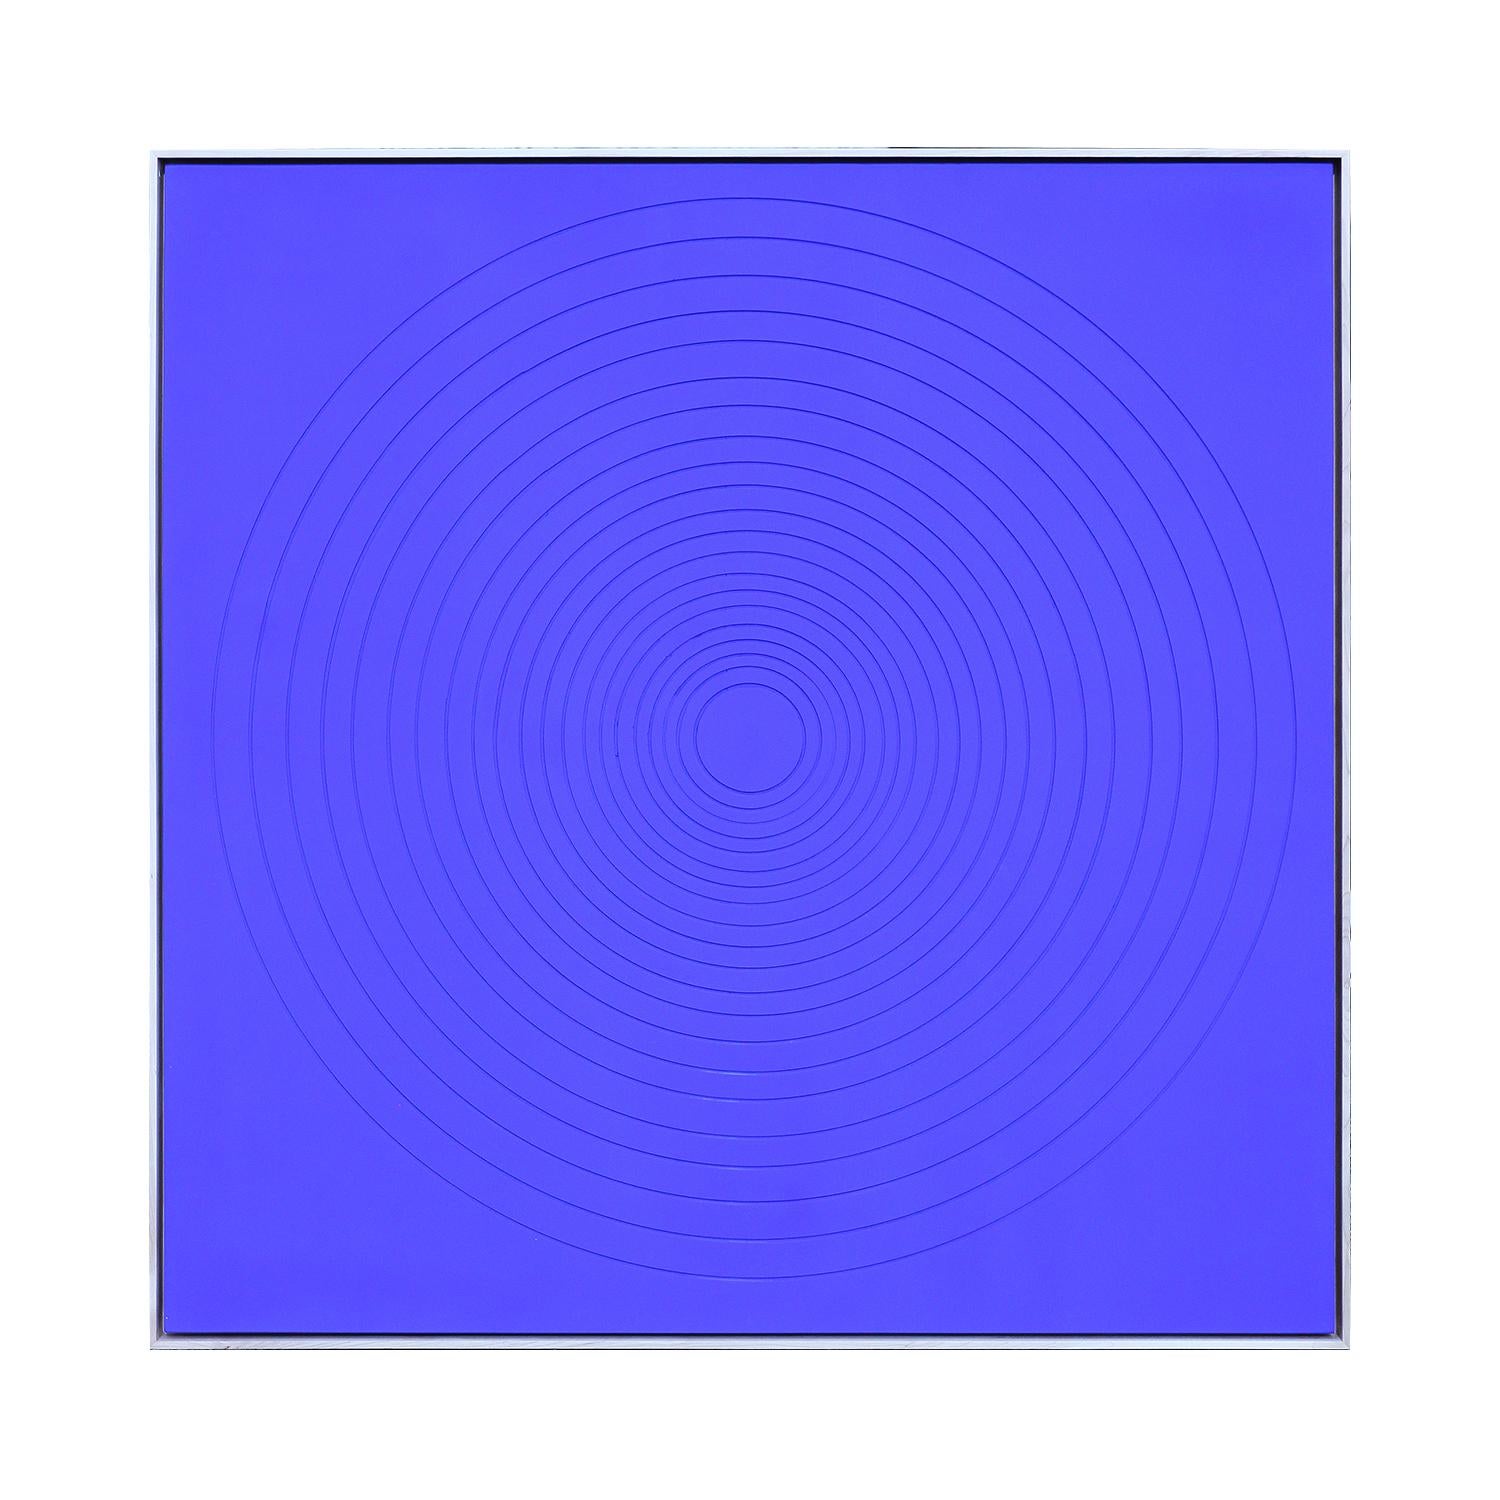 Abstract grooved wall sculpture painted with blue pigment paint. Displayed in a complementary light oak frame which sets off the richness of the blue.

Dimensions With Frame: H 45 in. x W 45 in.

Artist Biography: Matthew Reeves is the owner of